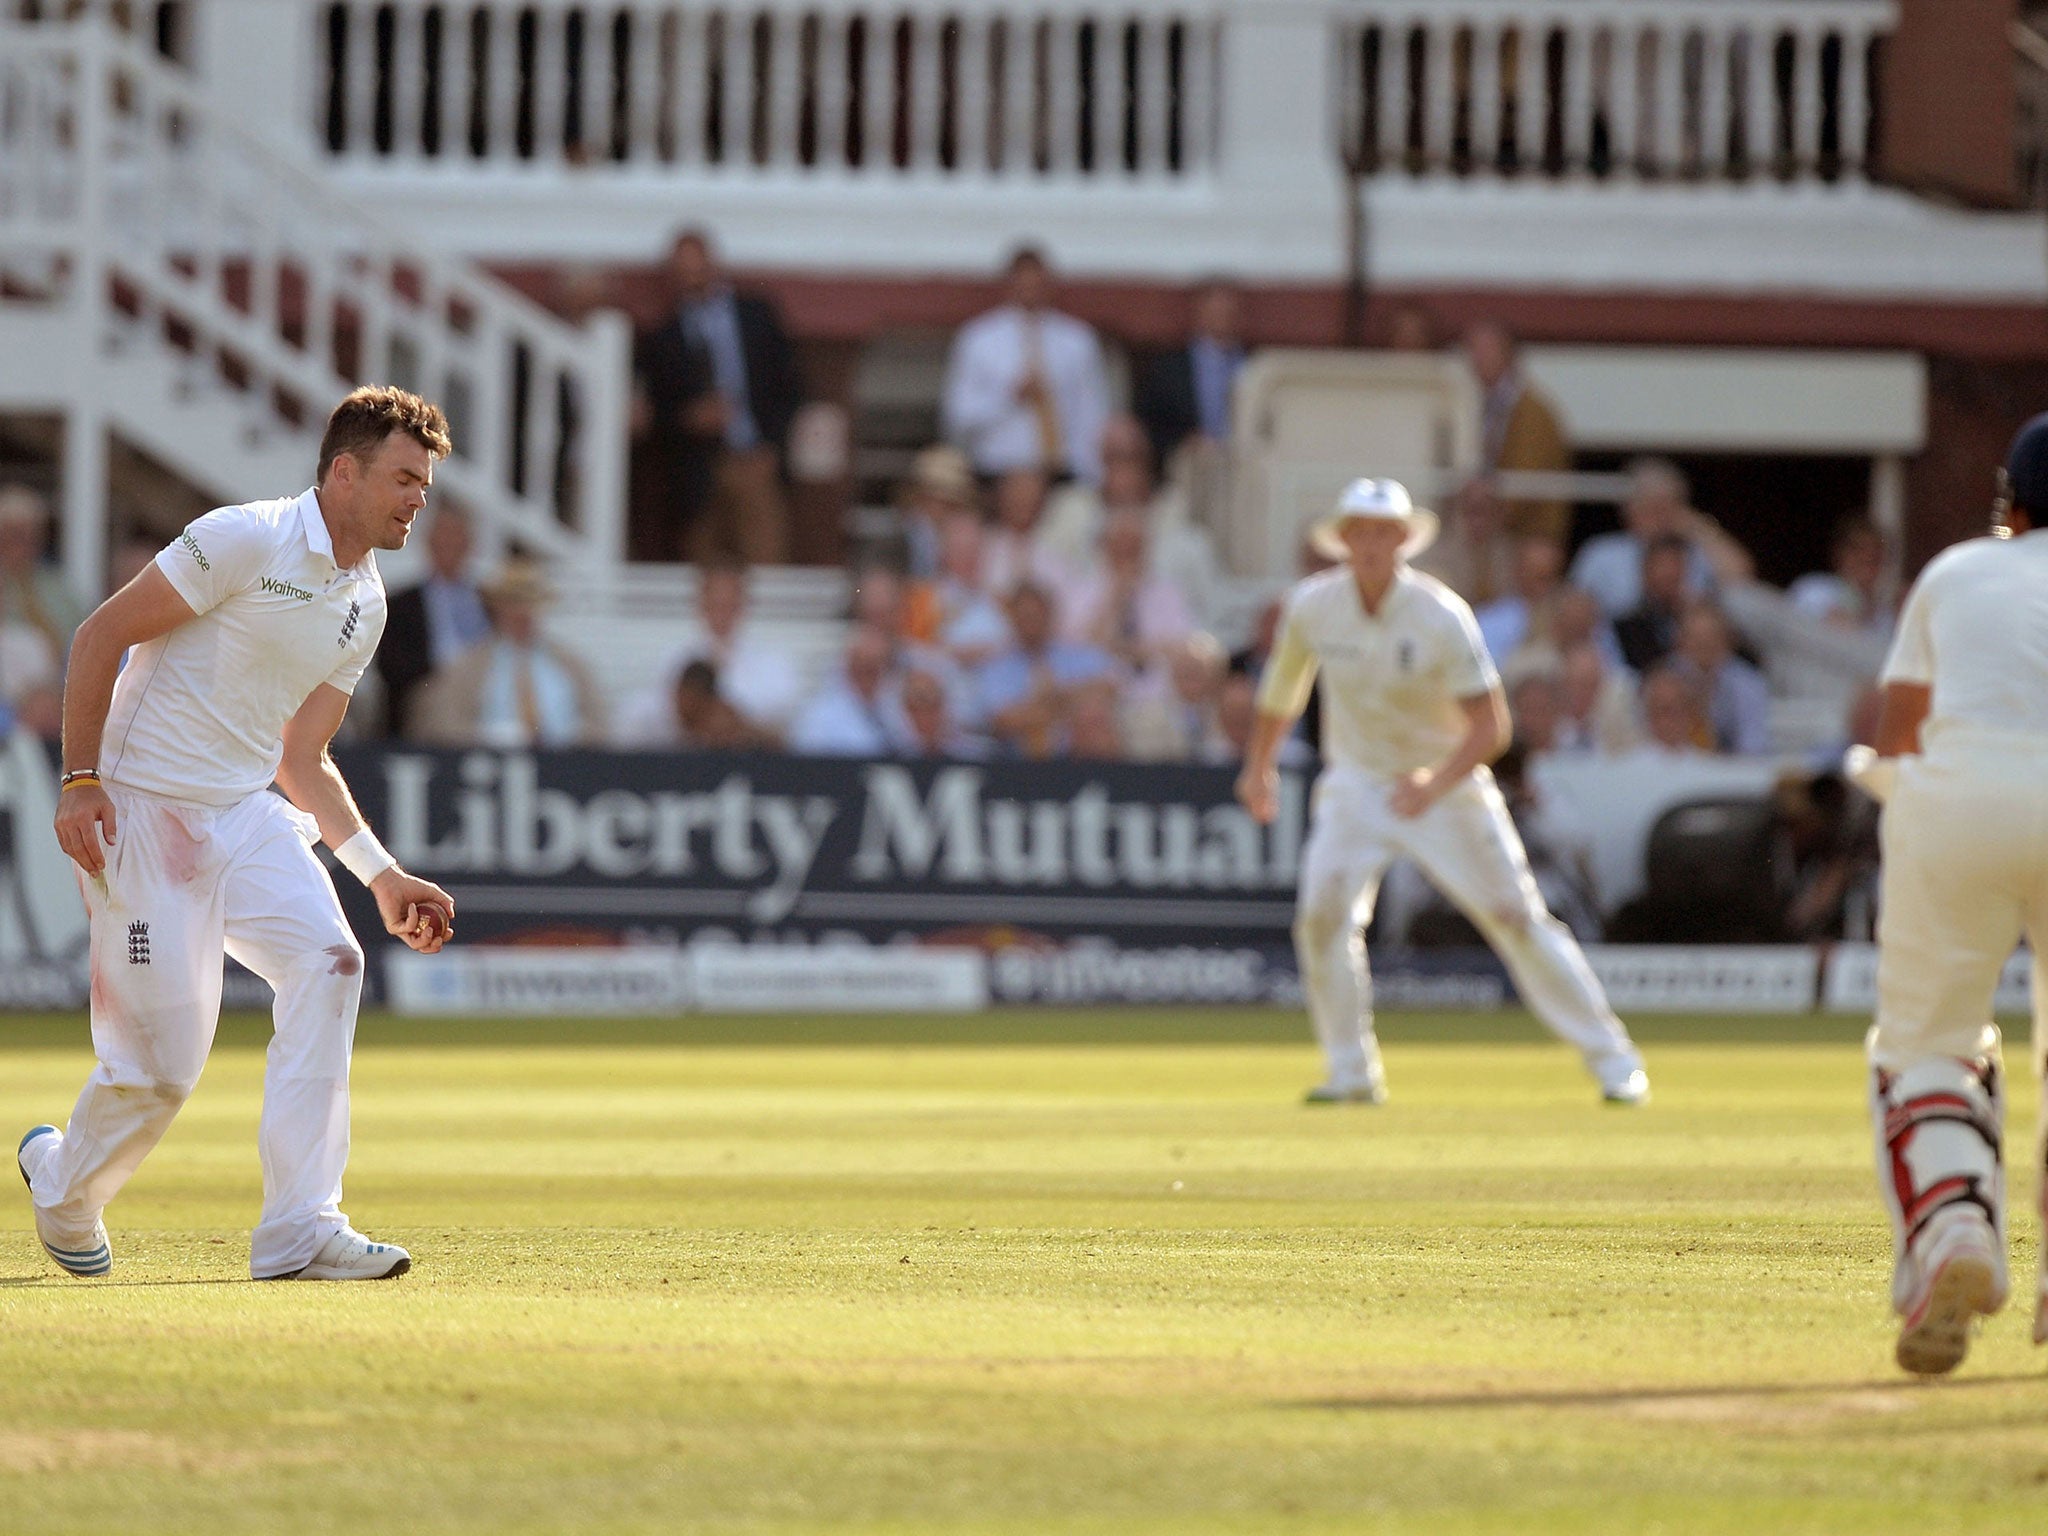 James Anderson and Stuart Broad were guilty of wasting the early overs